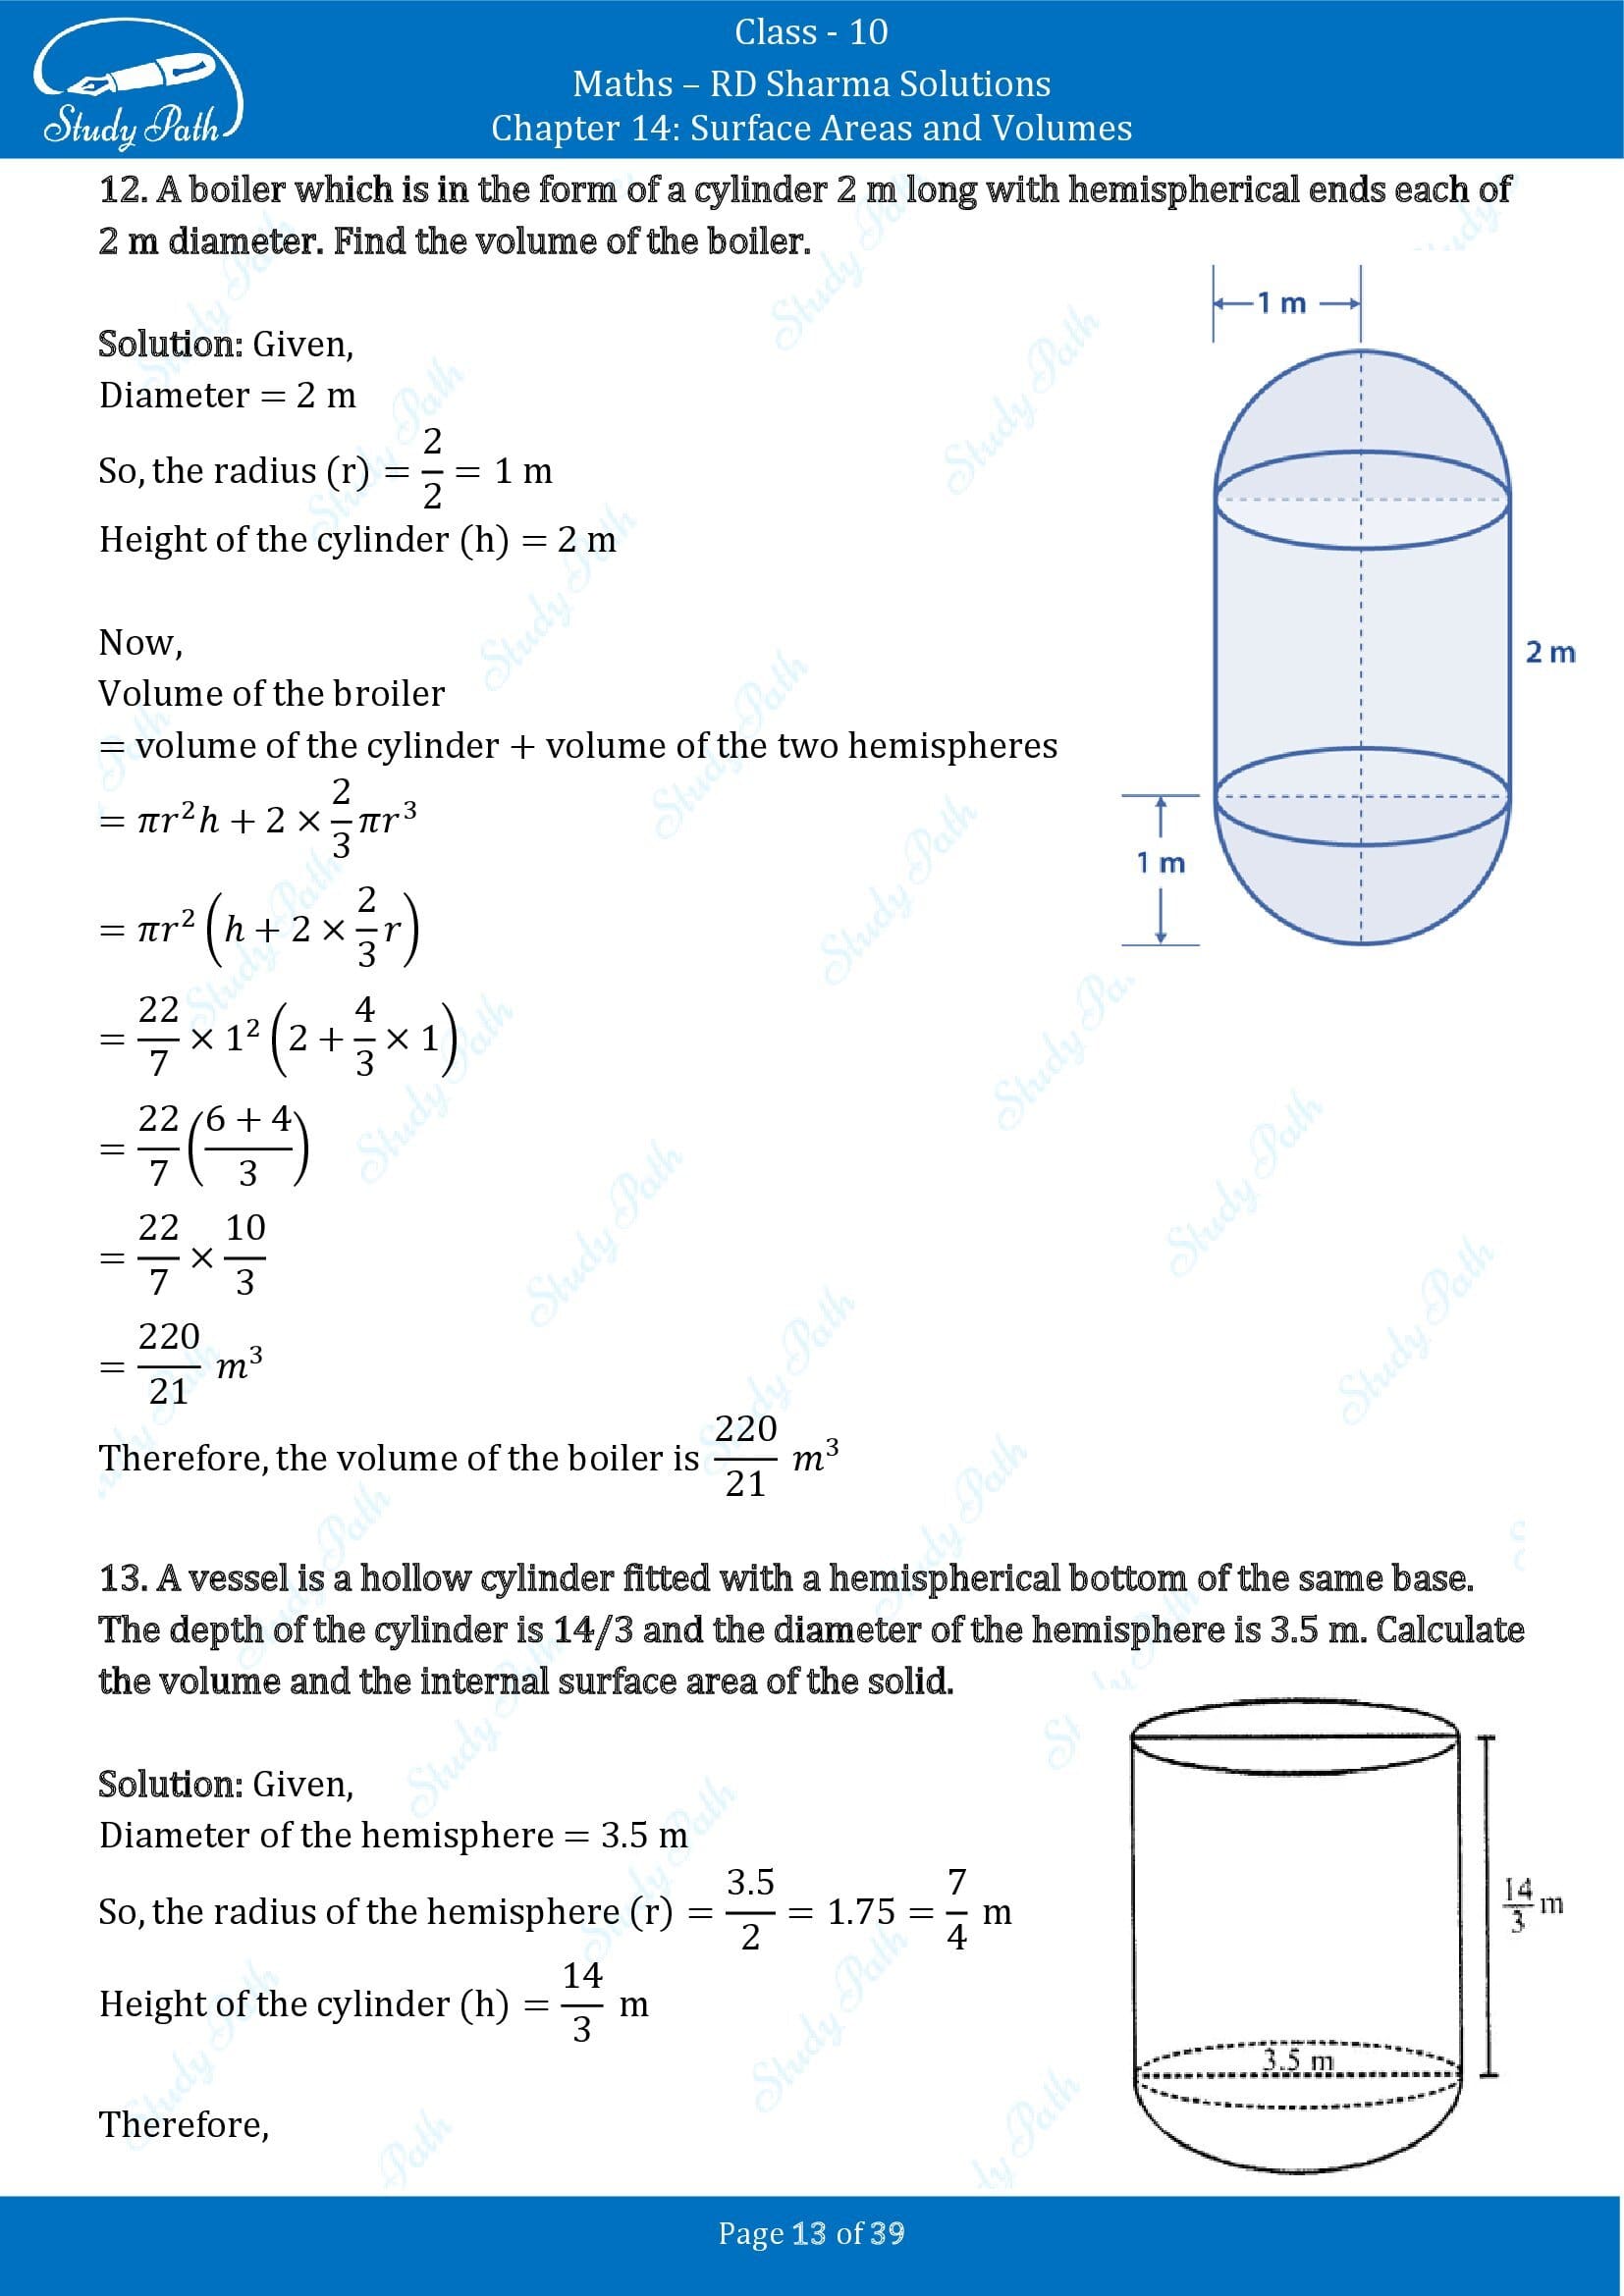 RD Sharma Solutions Class 10 Chapter 14 Surface Areas and Volumes Exercise 14.2 00013